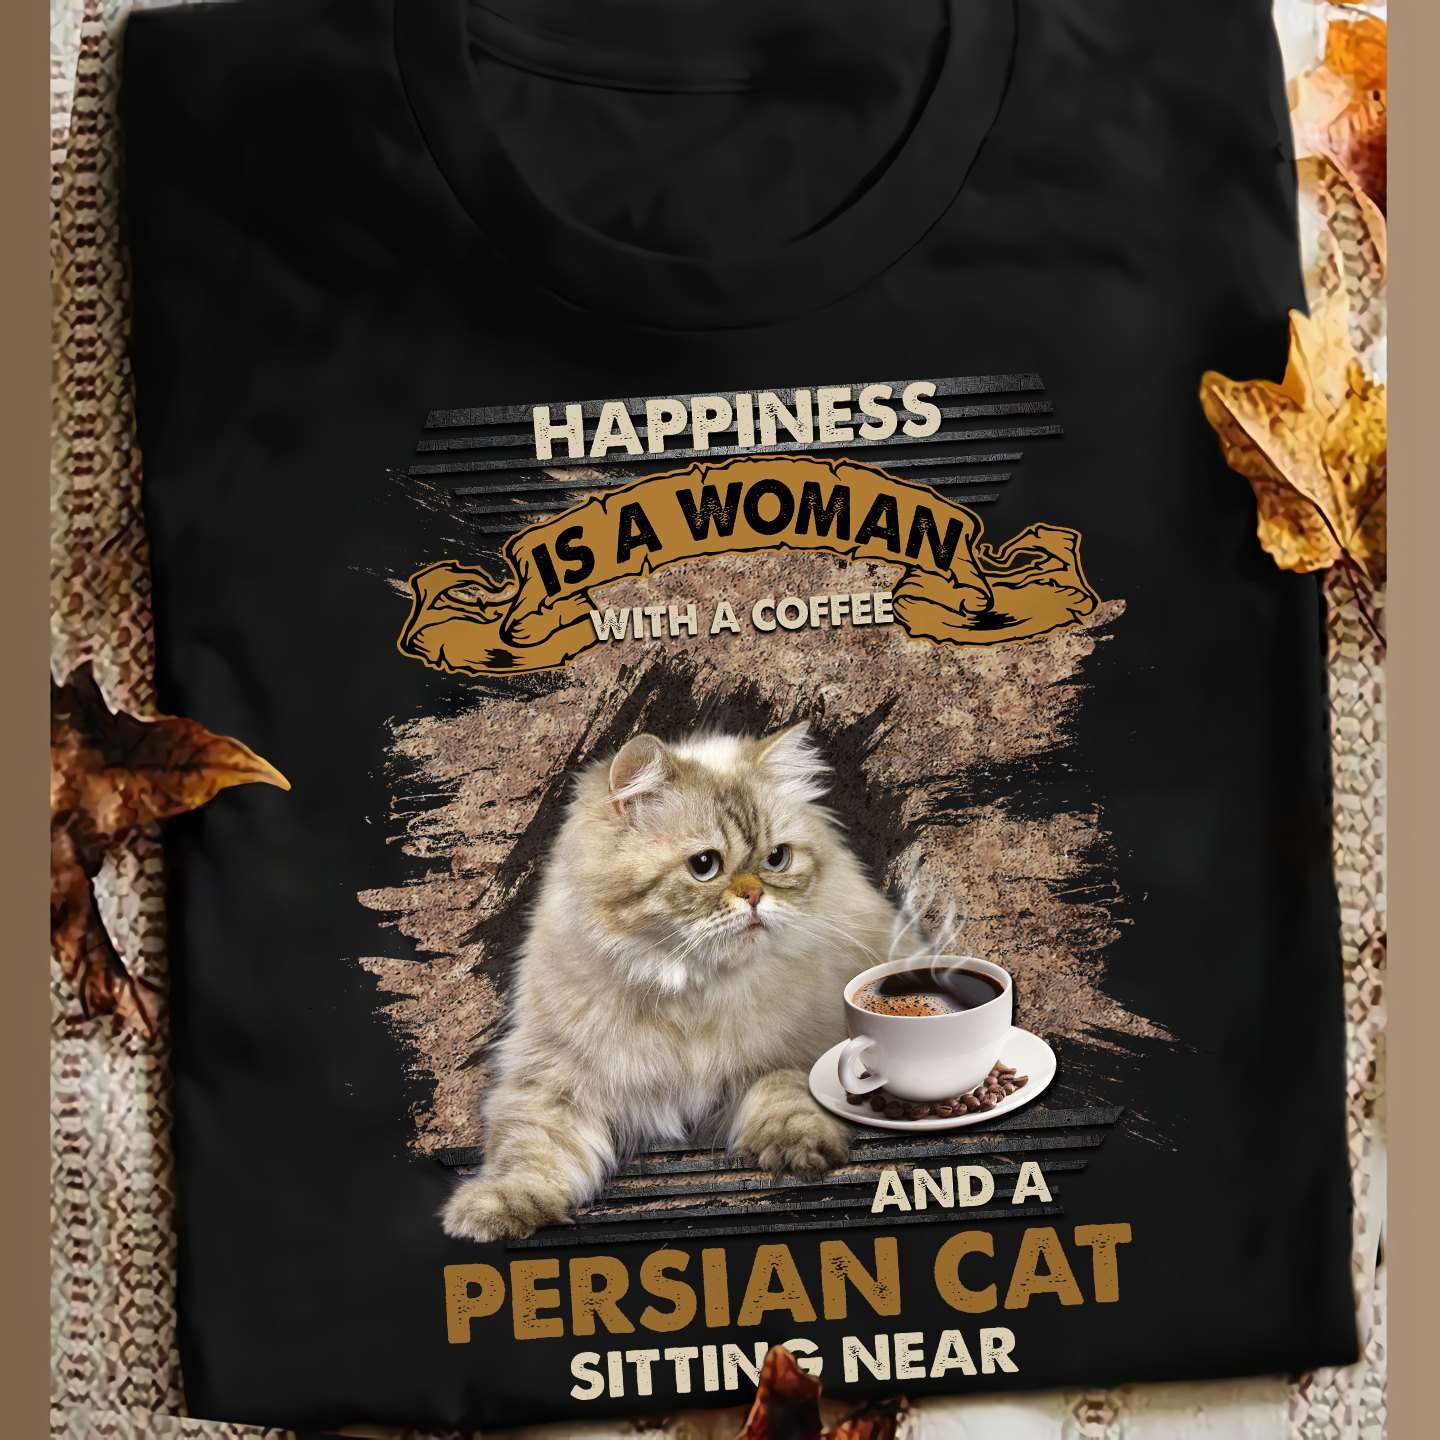 Persian Cat Coffee - Happiness is a woman with a coffee and a persian cat sitting near